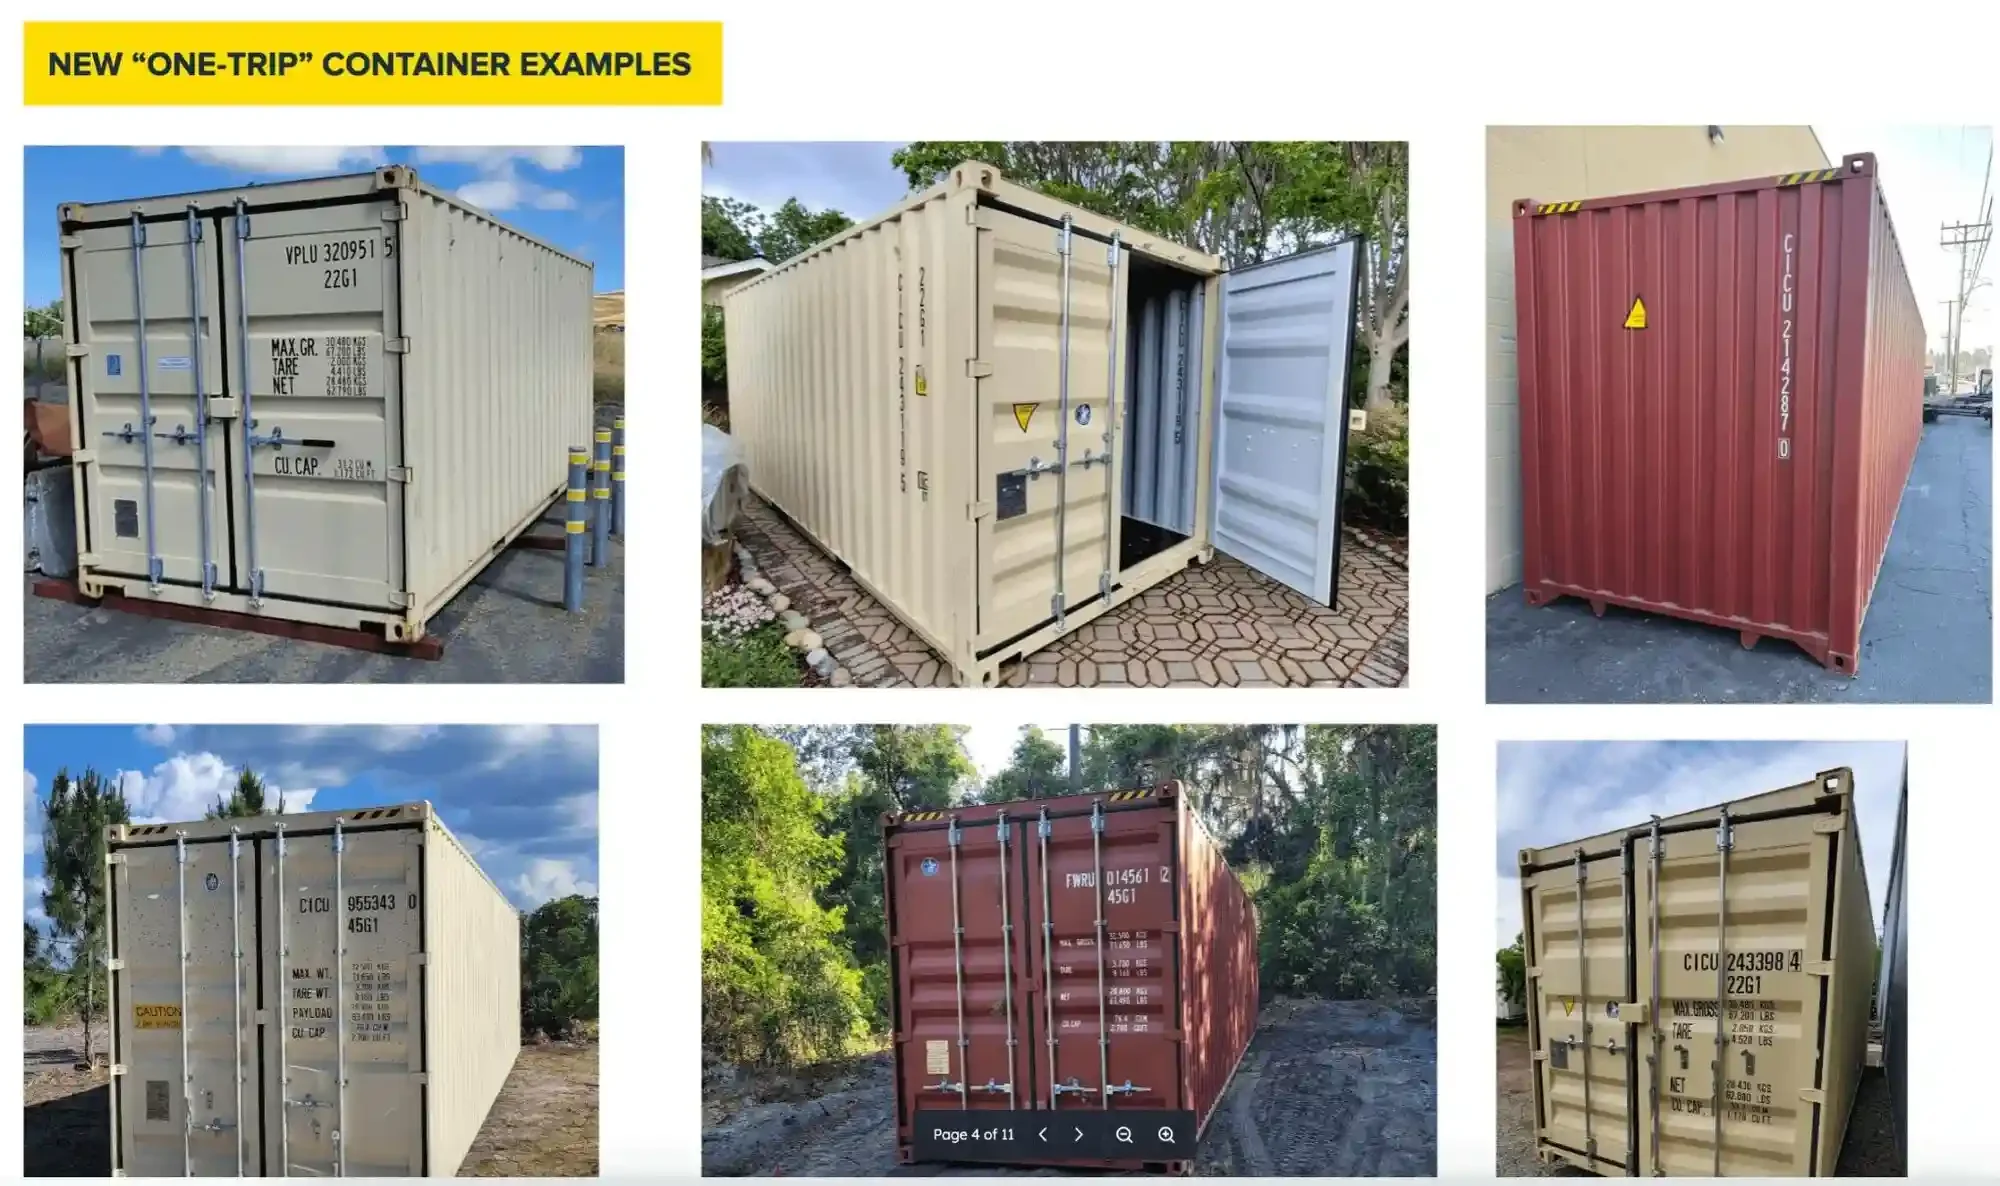 Photos of new one-trip shipping containers